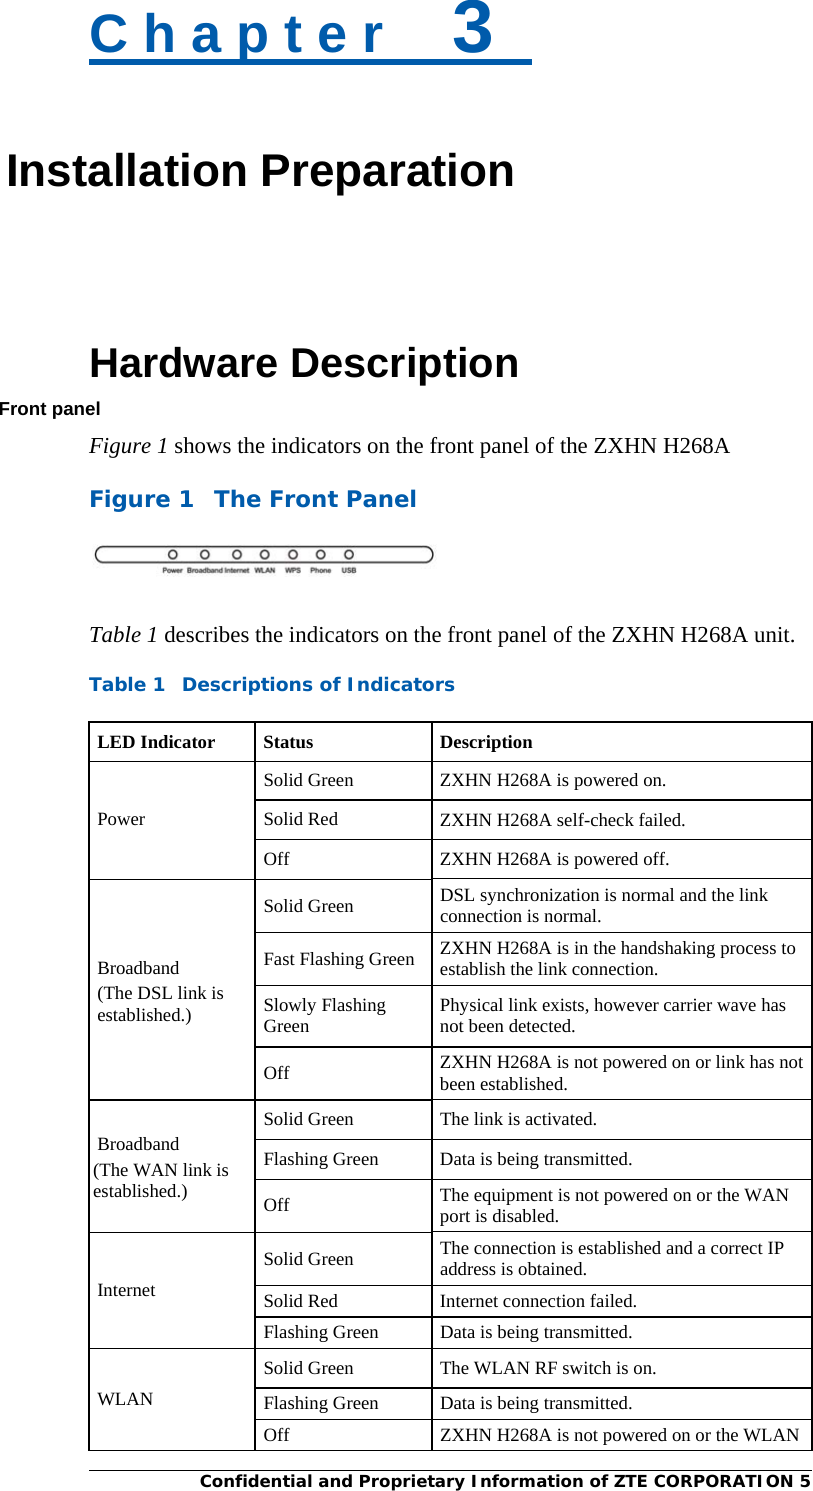  Confidential and Proprietary Information of ZTE CORPORATION 5 C h a p t e r    3   Installation Preparation   Hardware Description Front panel Figure 1 shows the indicators on the front panel of the ZXHN H268A Figure 1  The Front Panel    Table 1 describes the indicators on the front panel of the ZXHN H268A unit. Table 1  Descriptions of Indicators LED Indicator  Status  Description Power Solid Green  ZXHN H268A is powered on. Solid Red  ZXHN H268A self-check failed. Off  ZXHN H268A is powered off. Broadband (The DSL link is established.) Solid Green  DSL synchronization is normal and the link connection is normal. Fast Flashing Green ZXHN H268A is in the handshaking process to establish the link connection. Slowly Flashing Green  Physical link exists, however carrier wave has not been detected. Off  ZXHN H268A is not powered on or link has not been established. Broadband (The WAN link is established.) Solid Green  The link is activated. Flashing Green  Data is being transmitted. Off  The equipment is not powered on or the WAN port is disabled. Internet Solid Green  The connection is established and a correct IP address is obtained. Solid Red  Internet connection failed. Flashing Green  Data is being transmitted. WLAN Solid Green  The WLAN RF switch is on. Flashing Green  Data is being transmitted. Off  ZXHN H268A is not powered on or the WLAN 